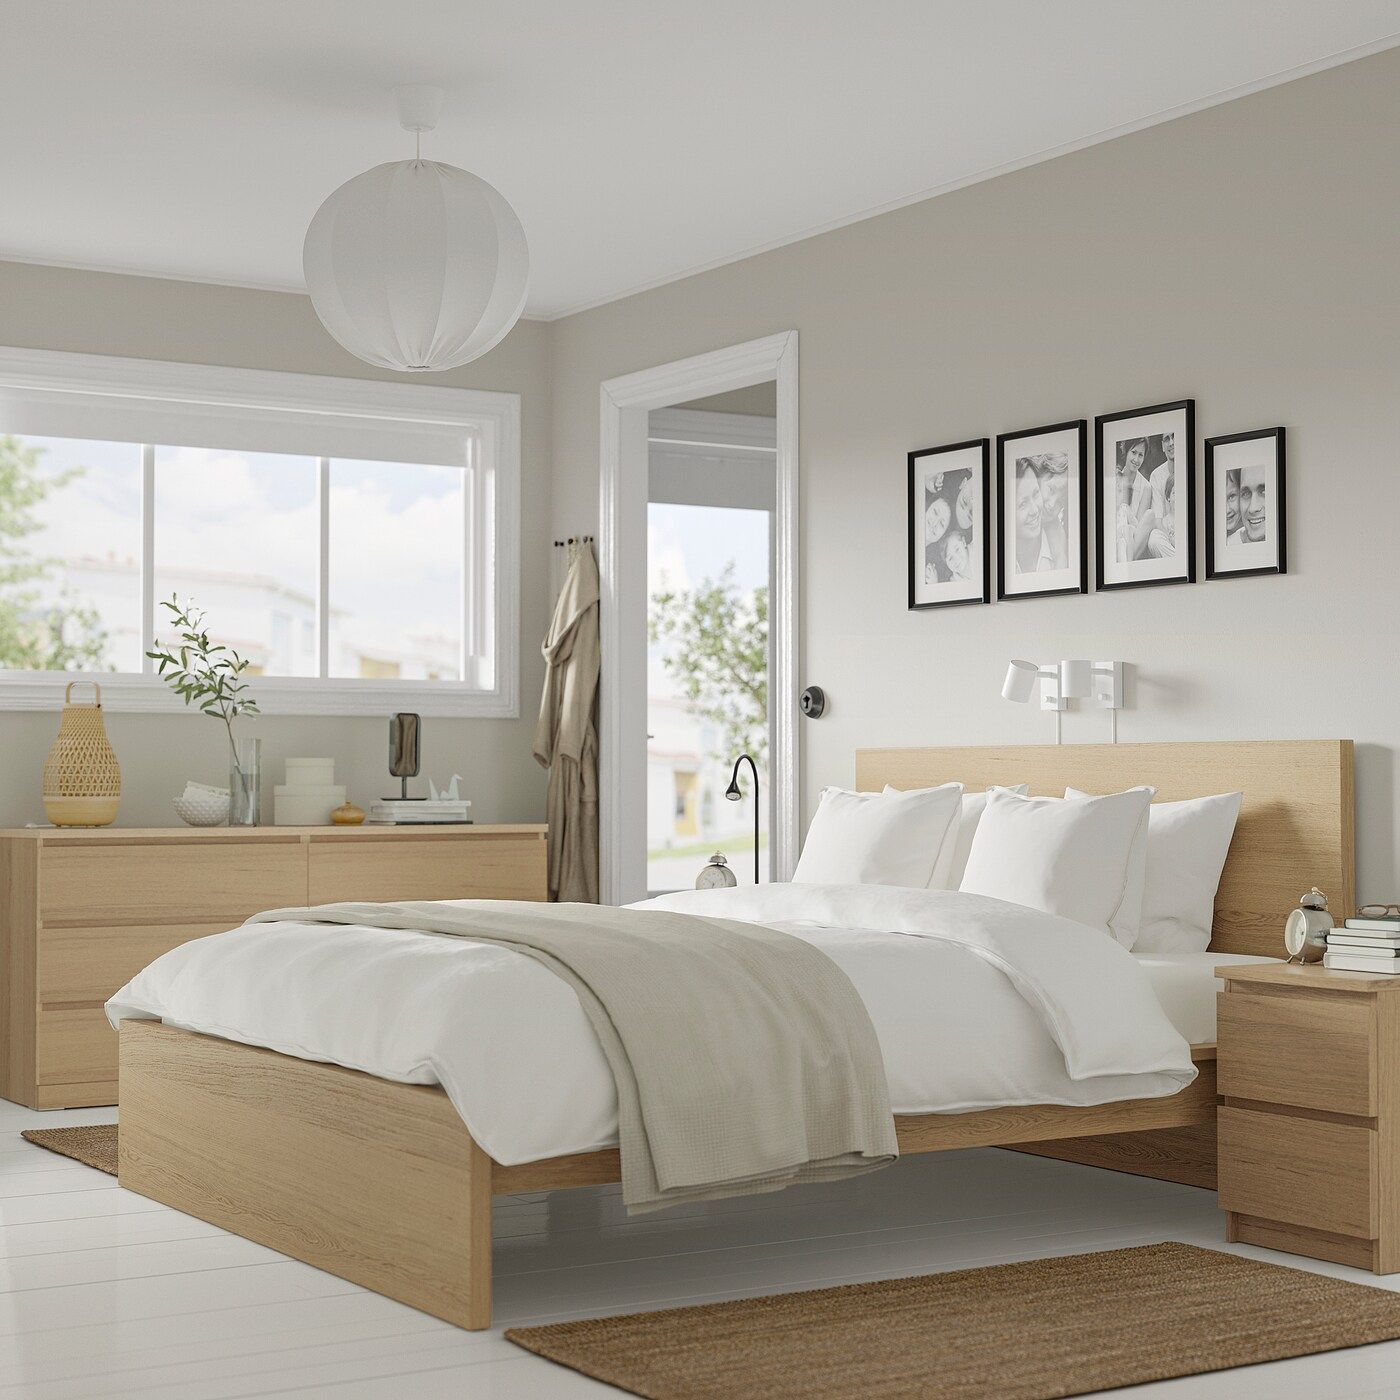 Maximize Your Bedroom Space with a Functional and Stylish Bedroom Set with Drawers Under Bed